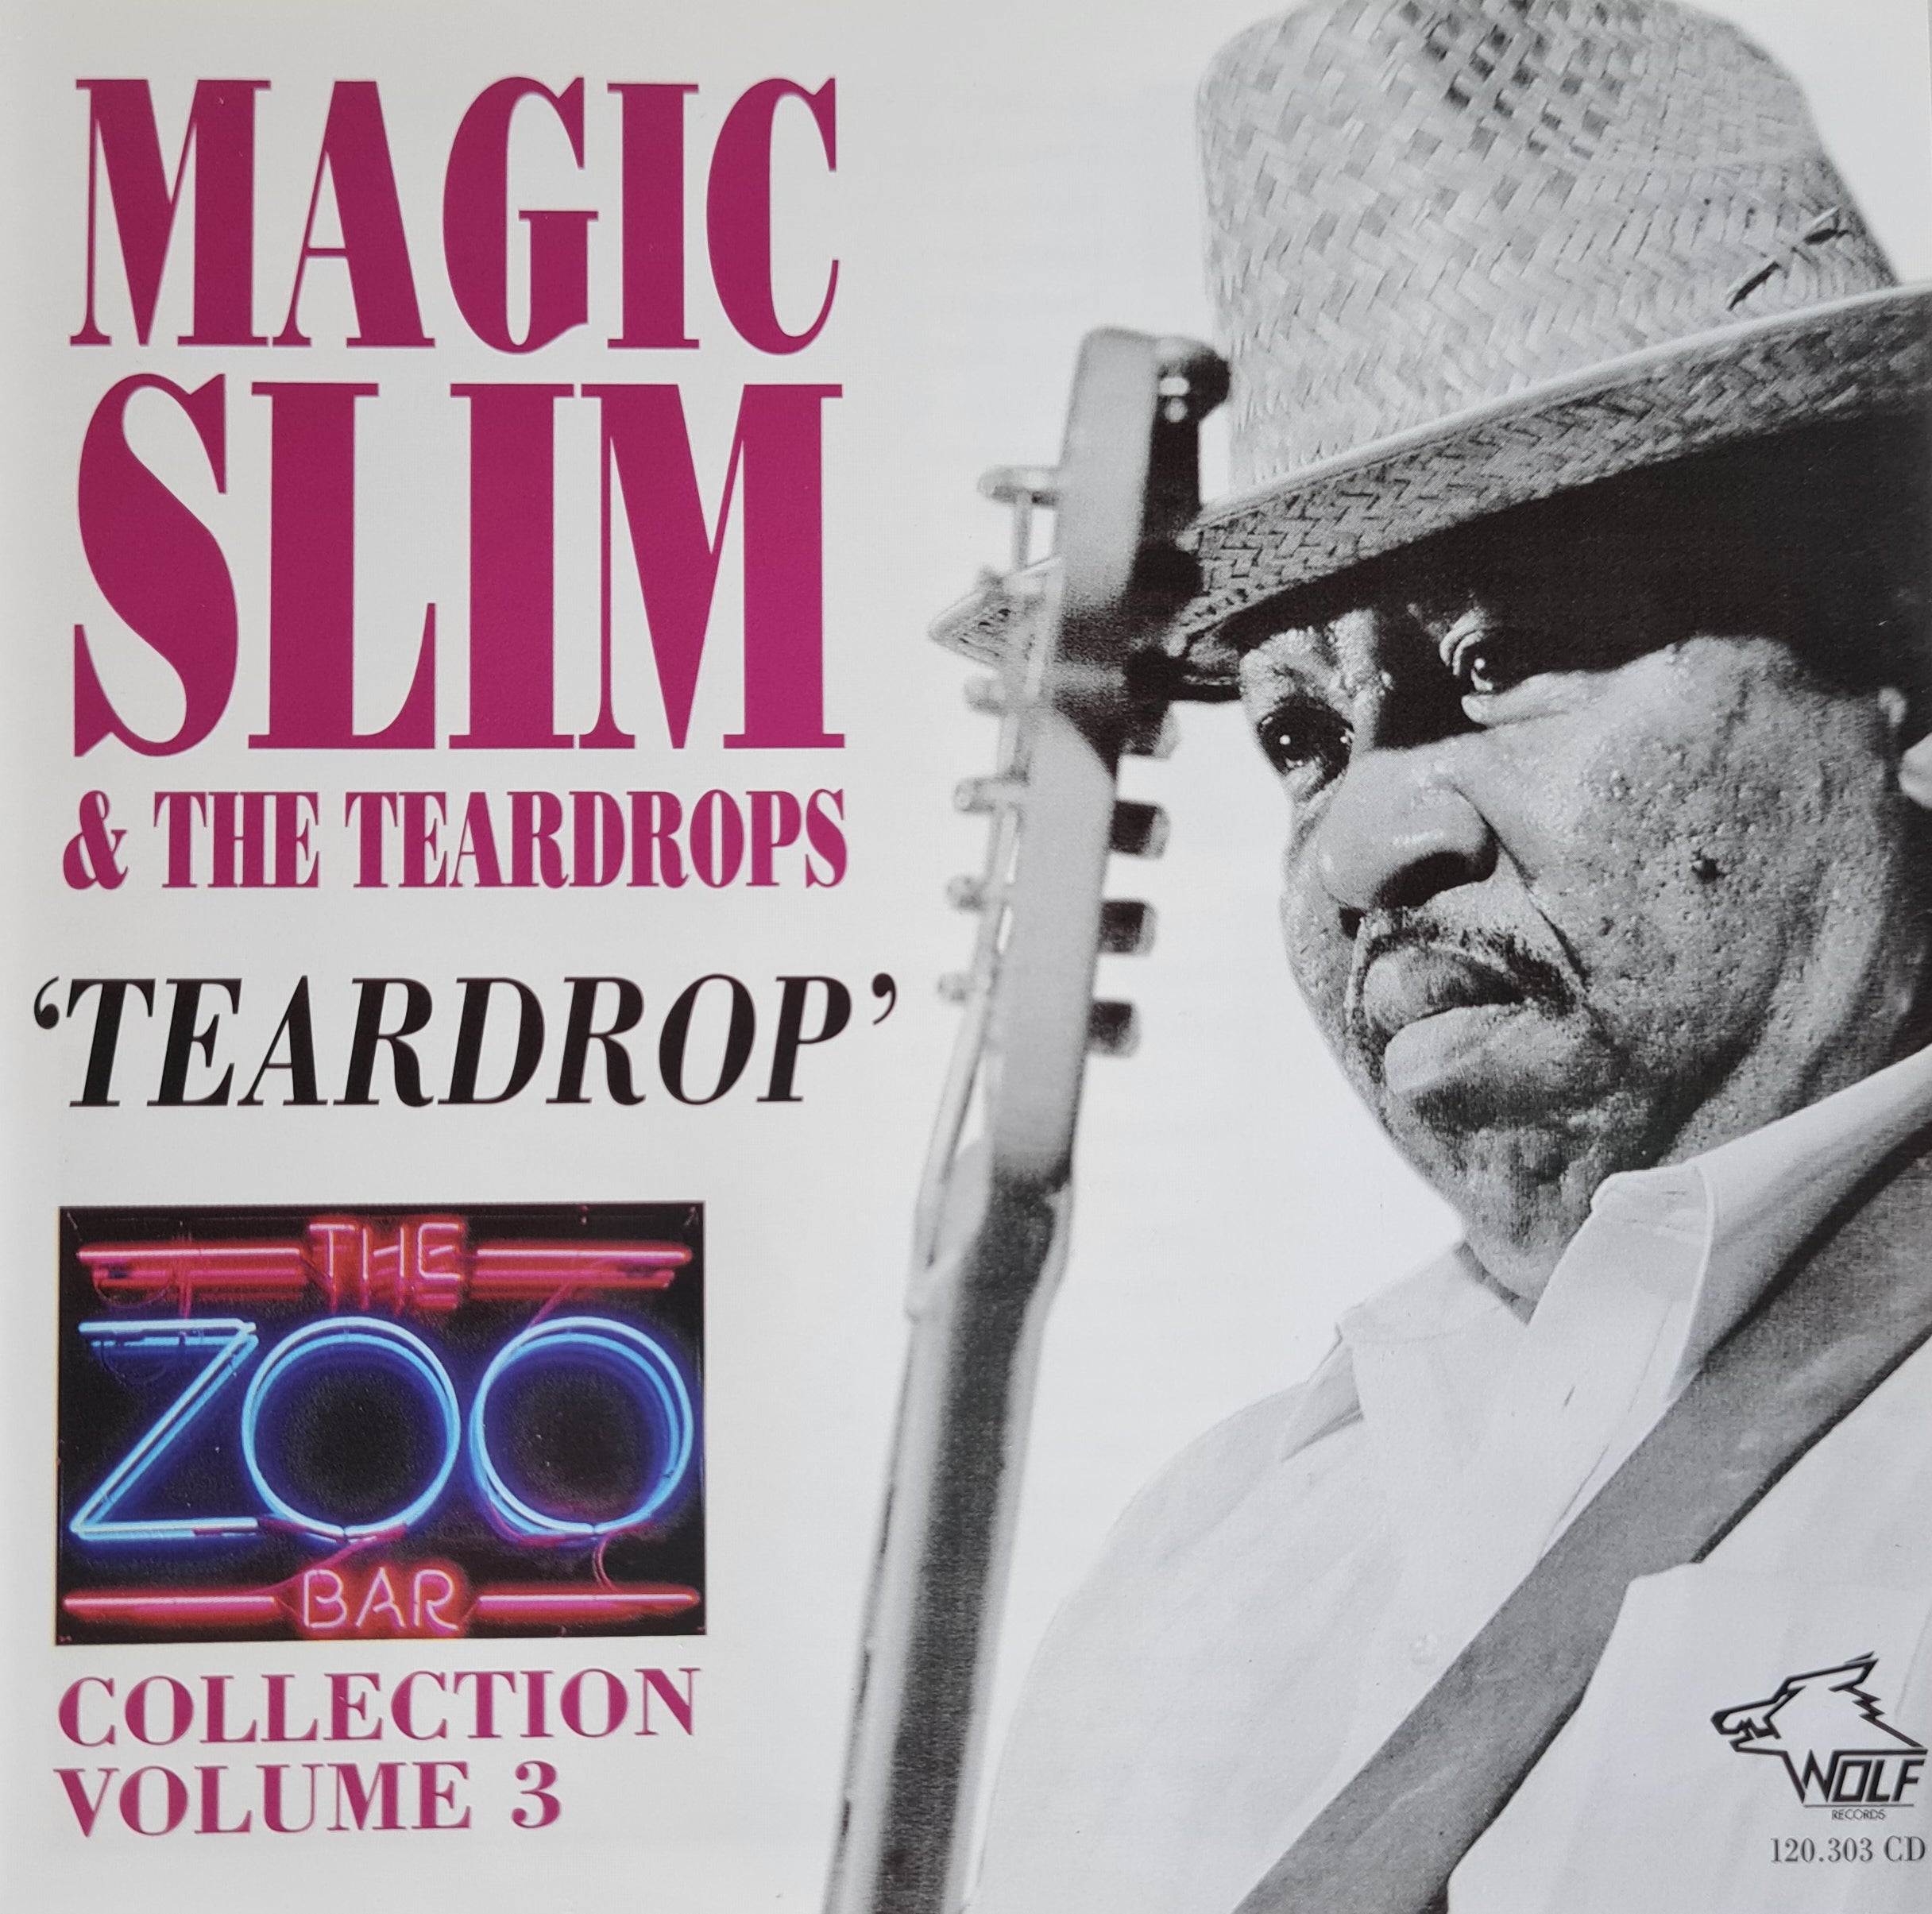 Magic Slim and the Teardrops - Teardrop - The Zoo Bar Collection Vol 3 (CD)